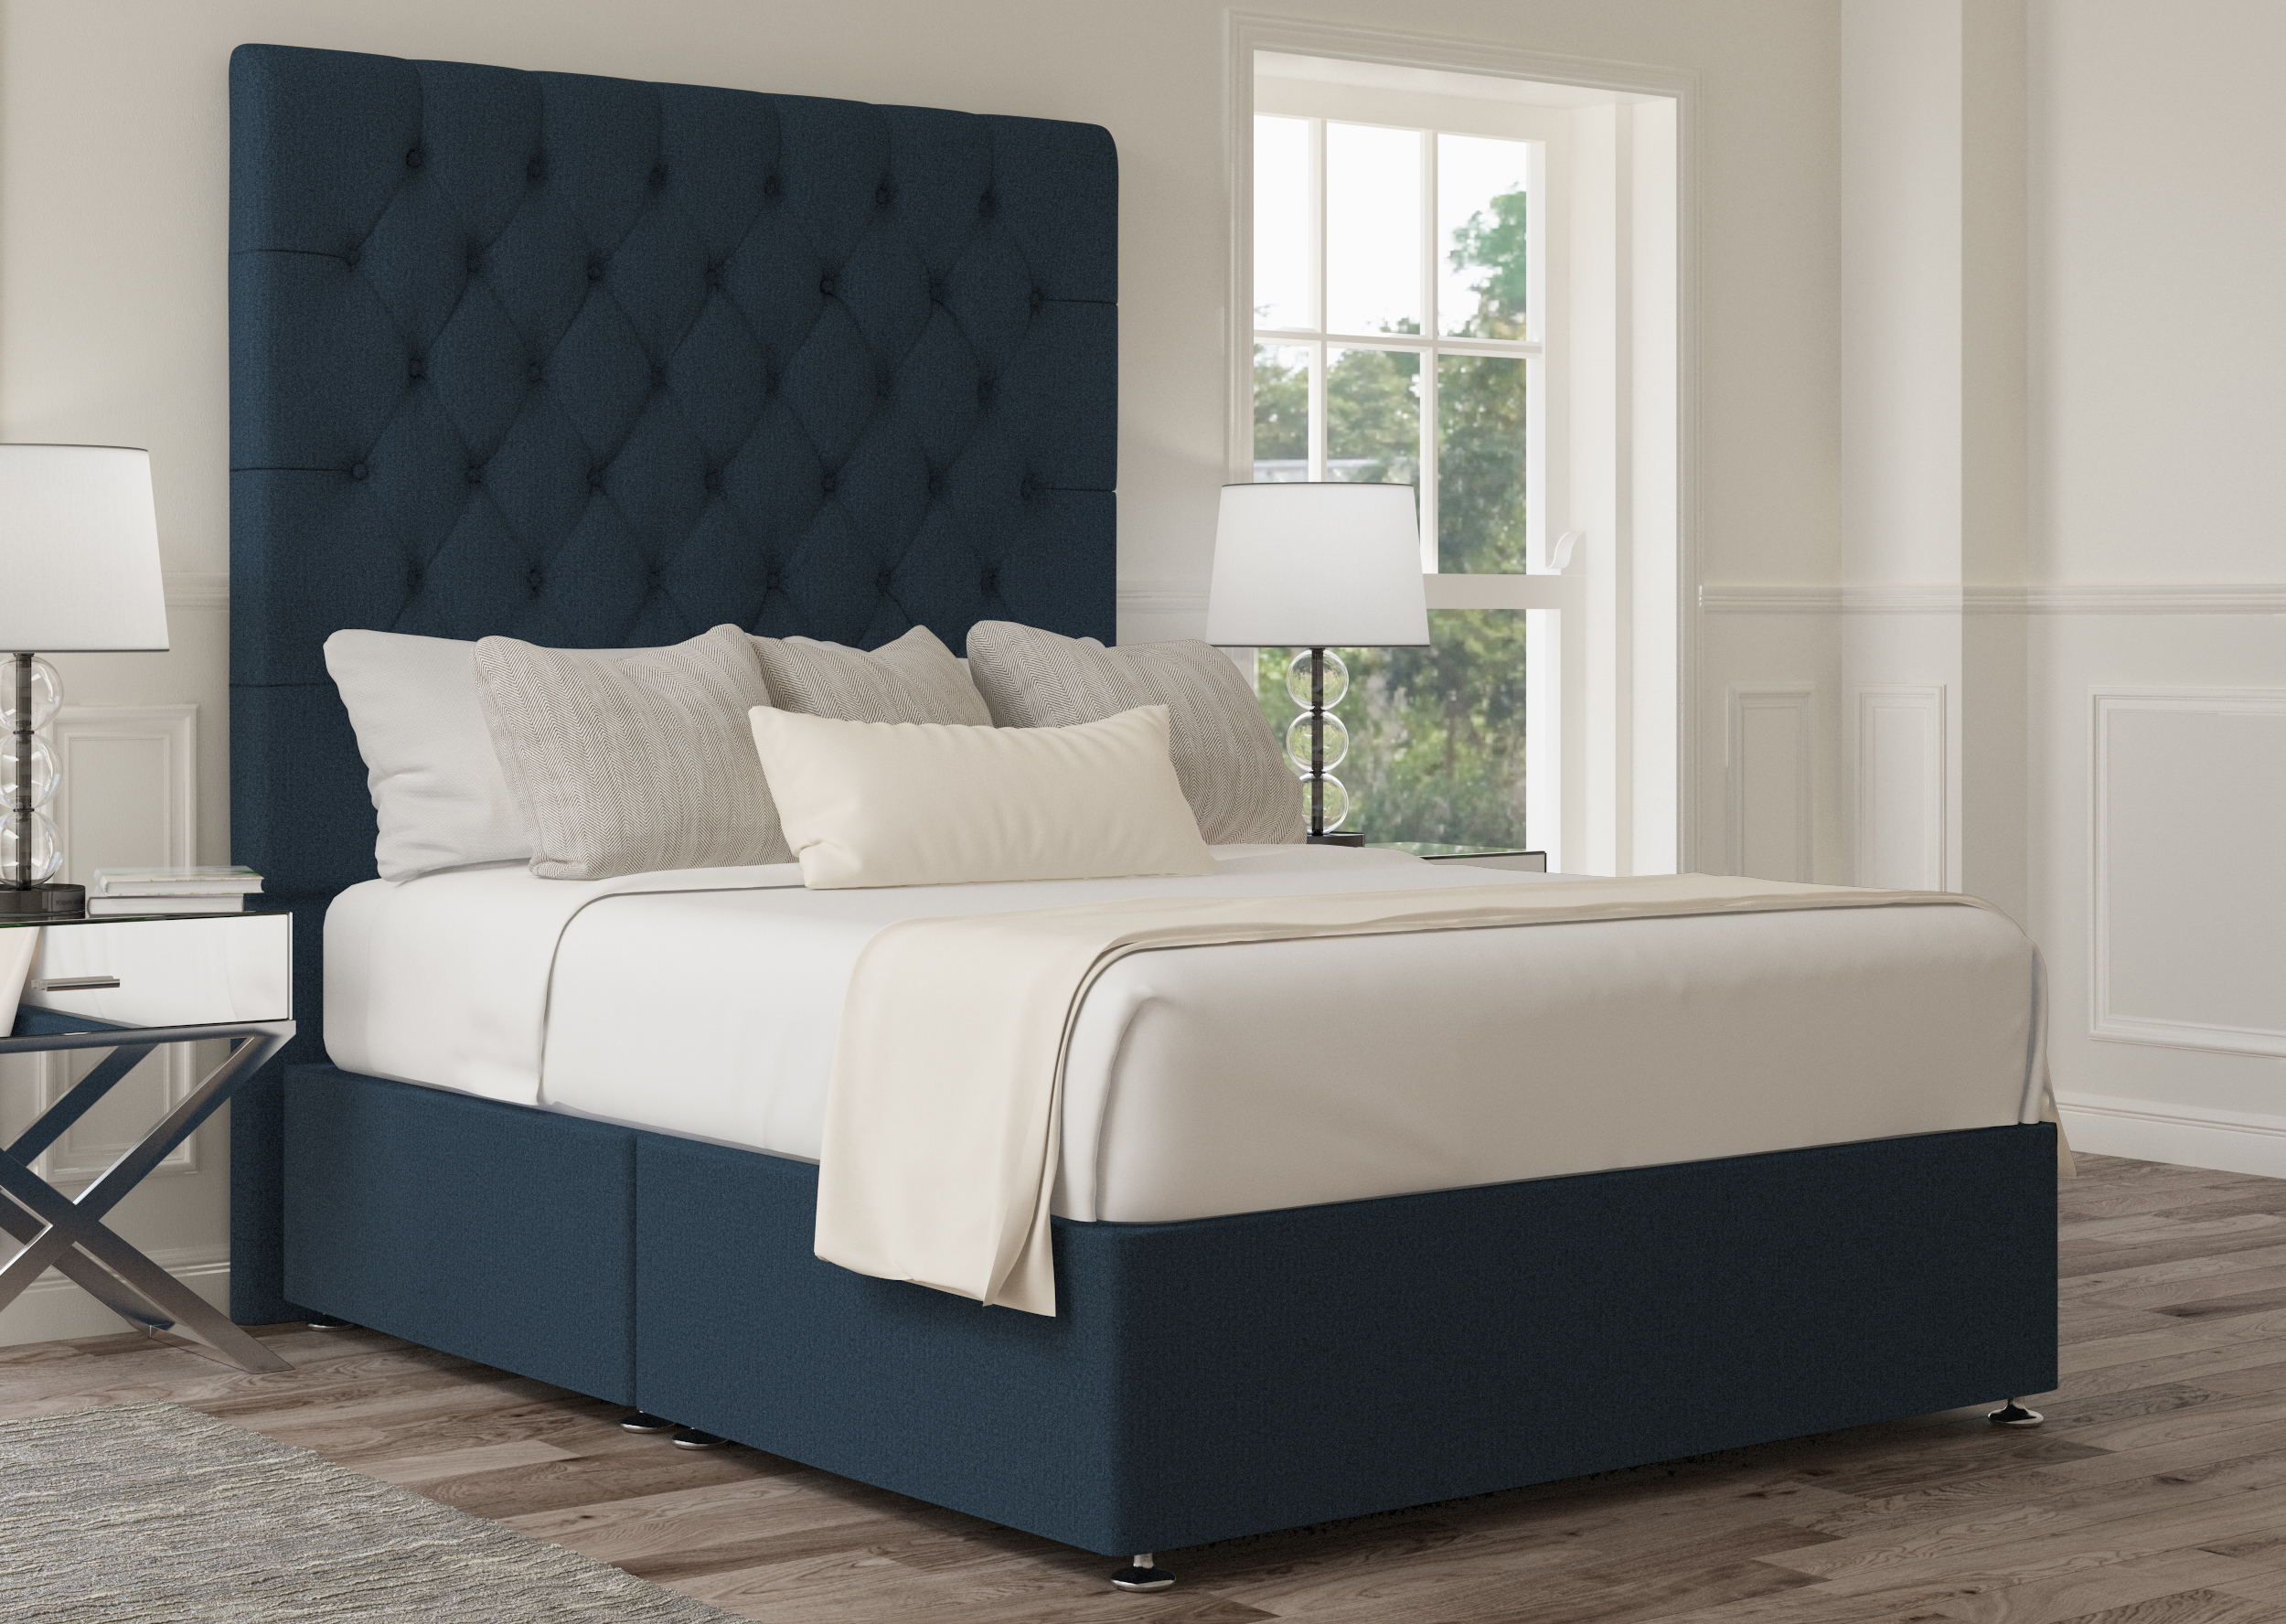 View Sephora Arran Pebble Upholstered Double Bed Time4Sleep information